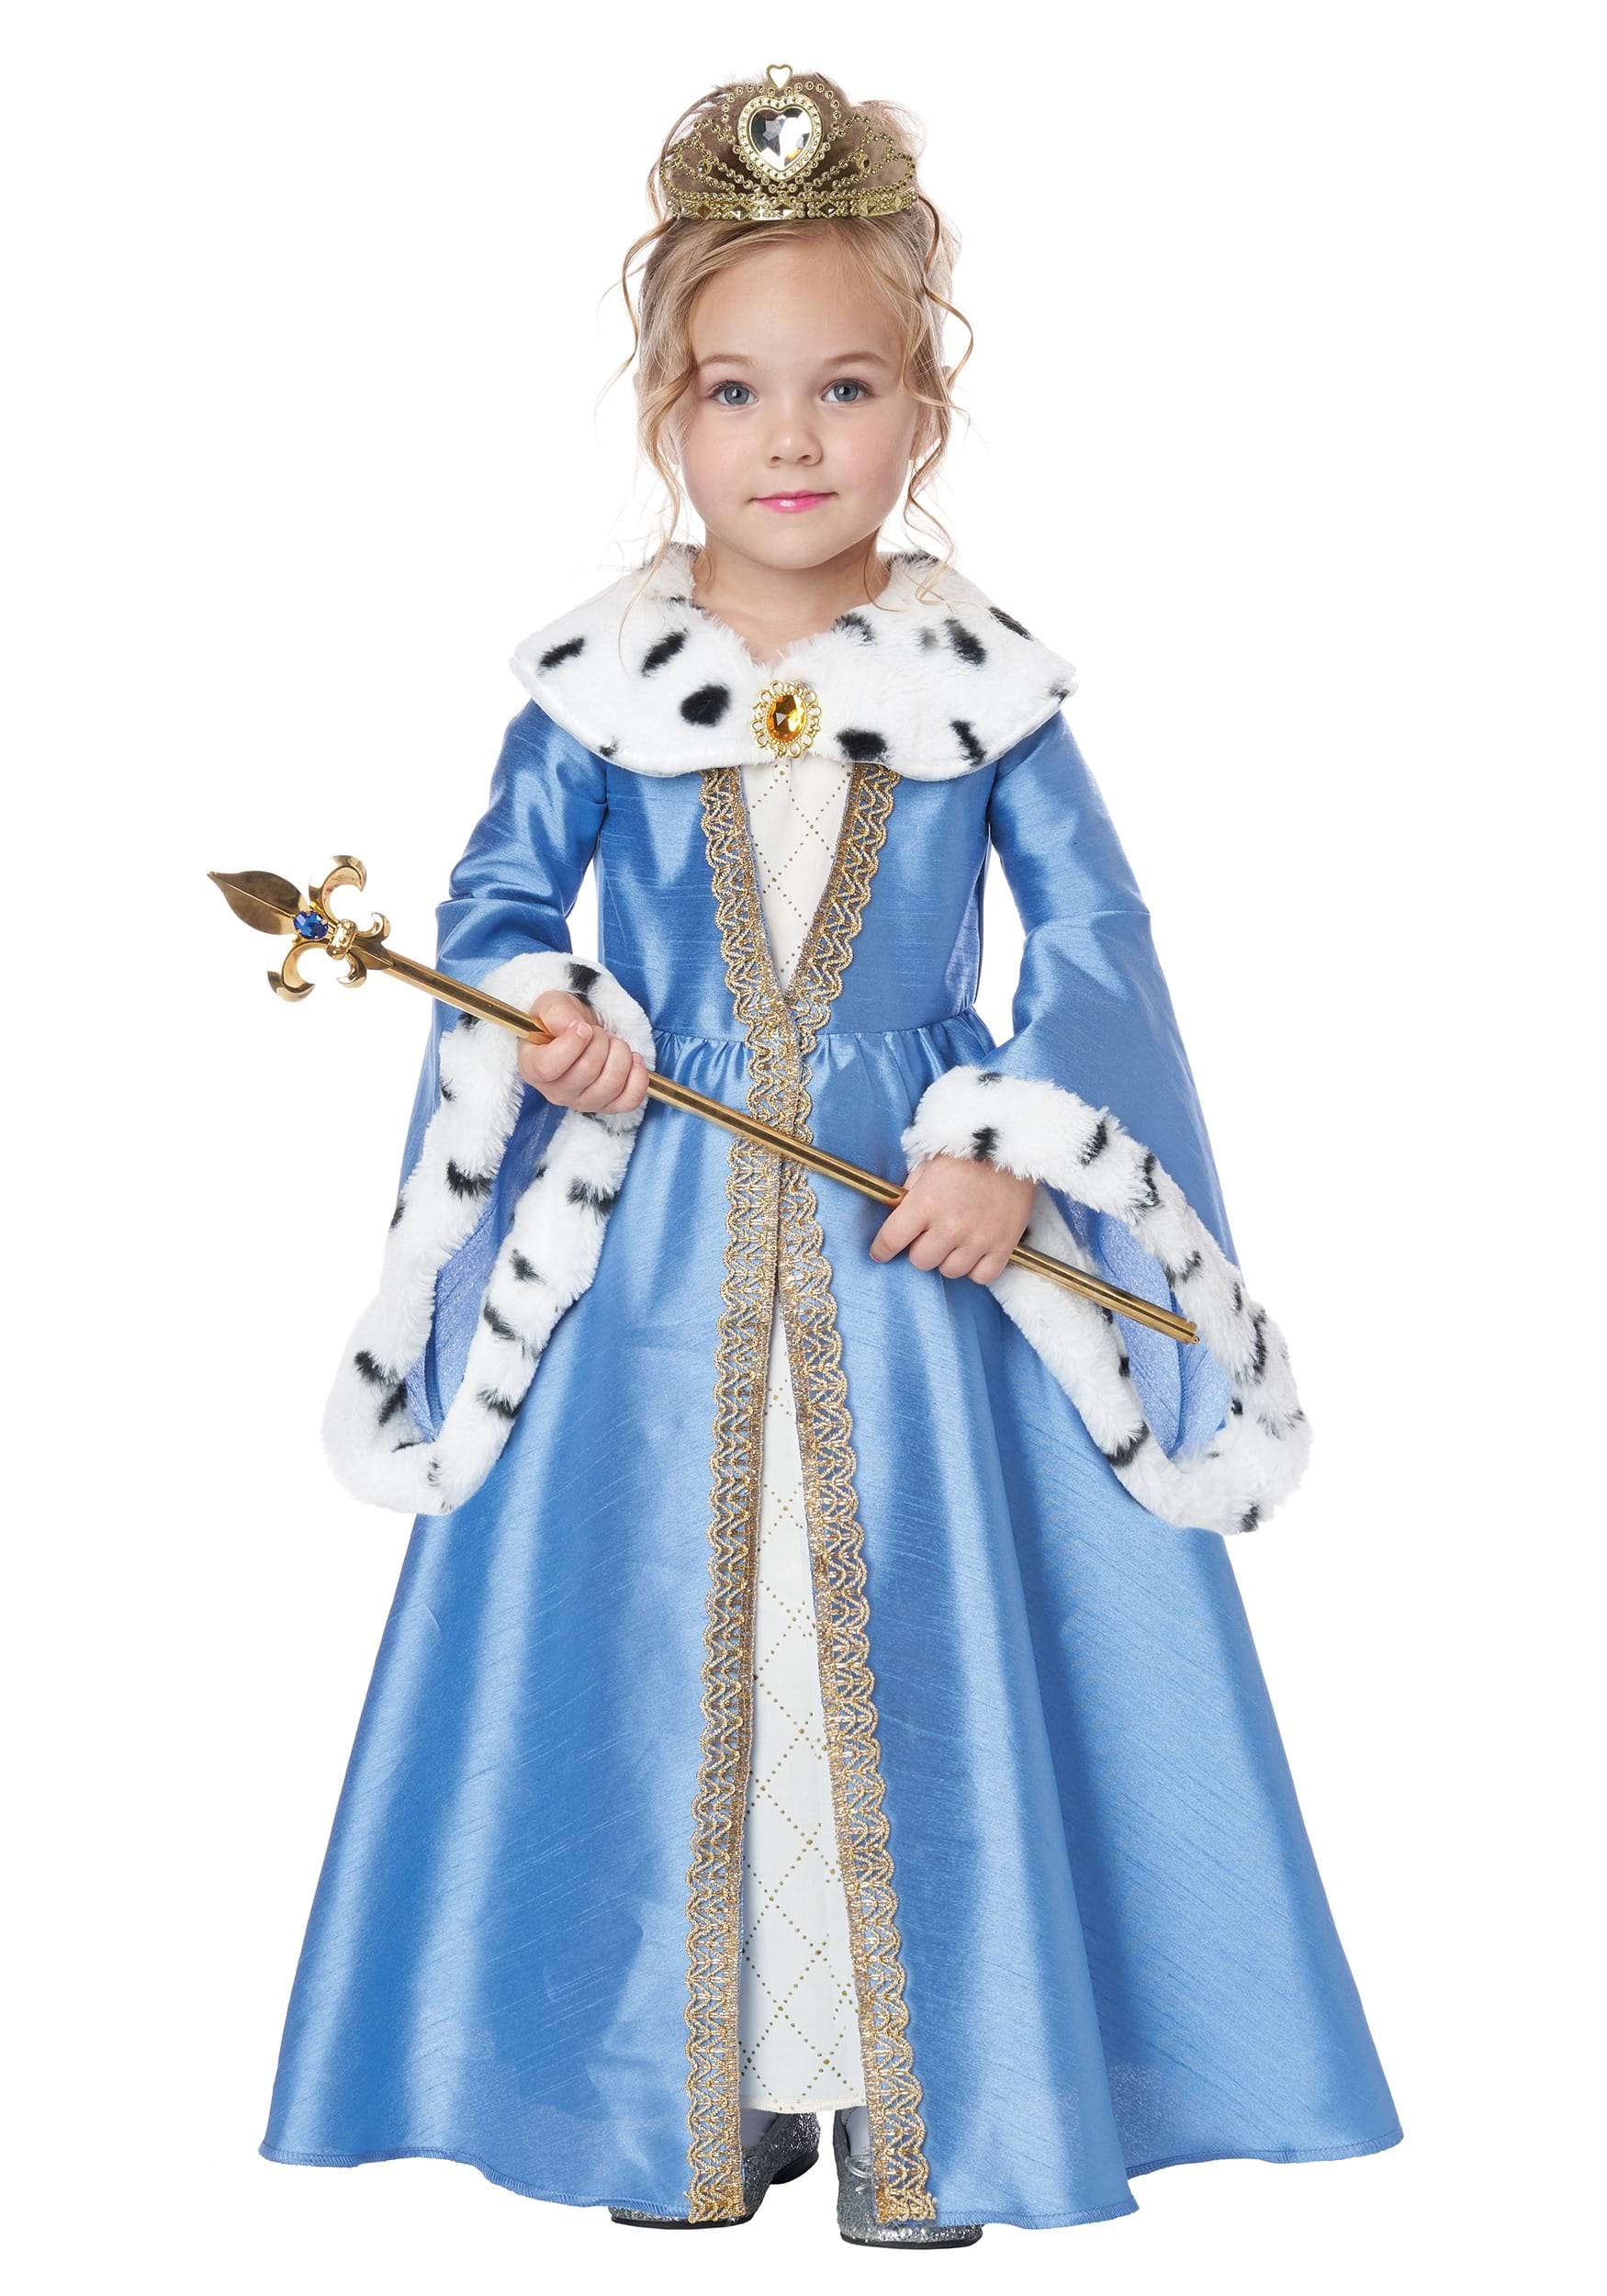 Photos - Fancy Dress California Costume Collection Girl's Little Queen Toddler Costume Black 